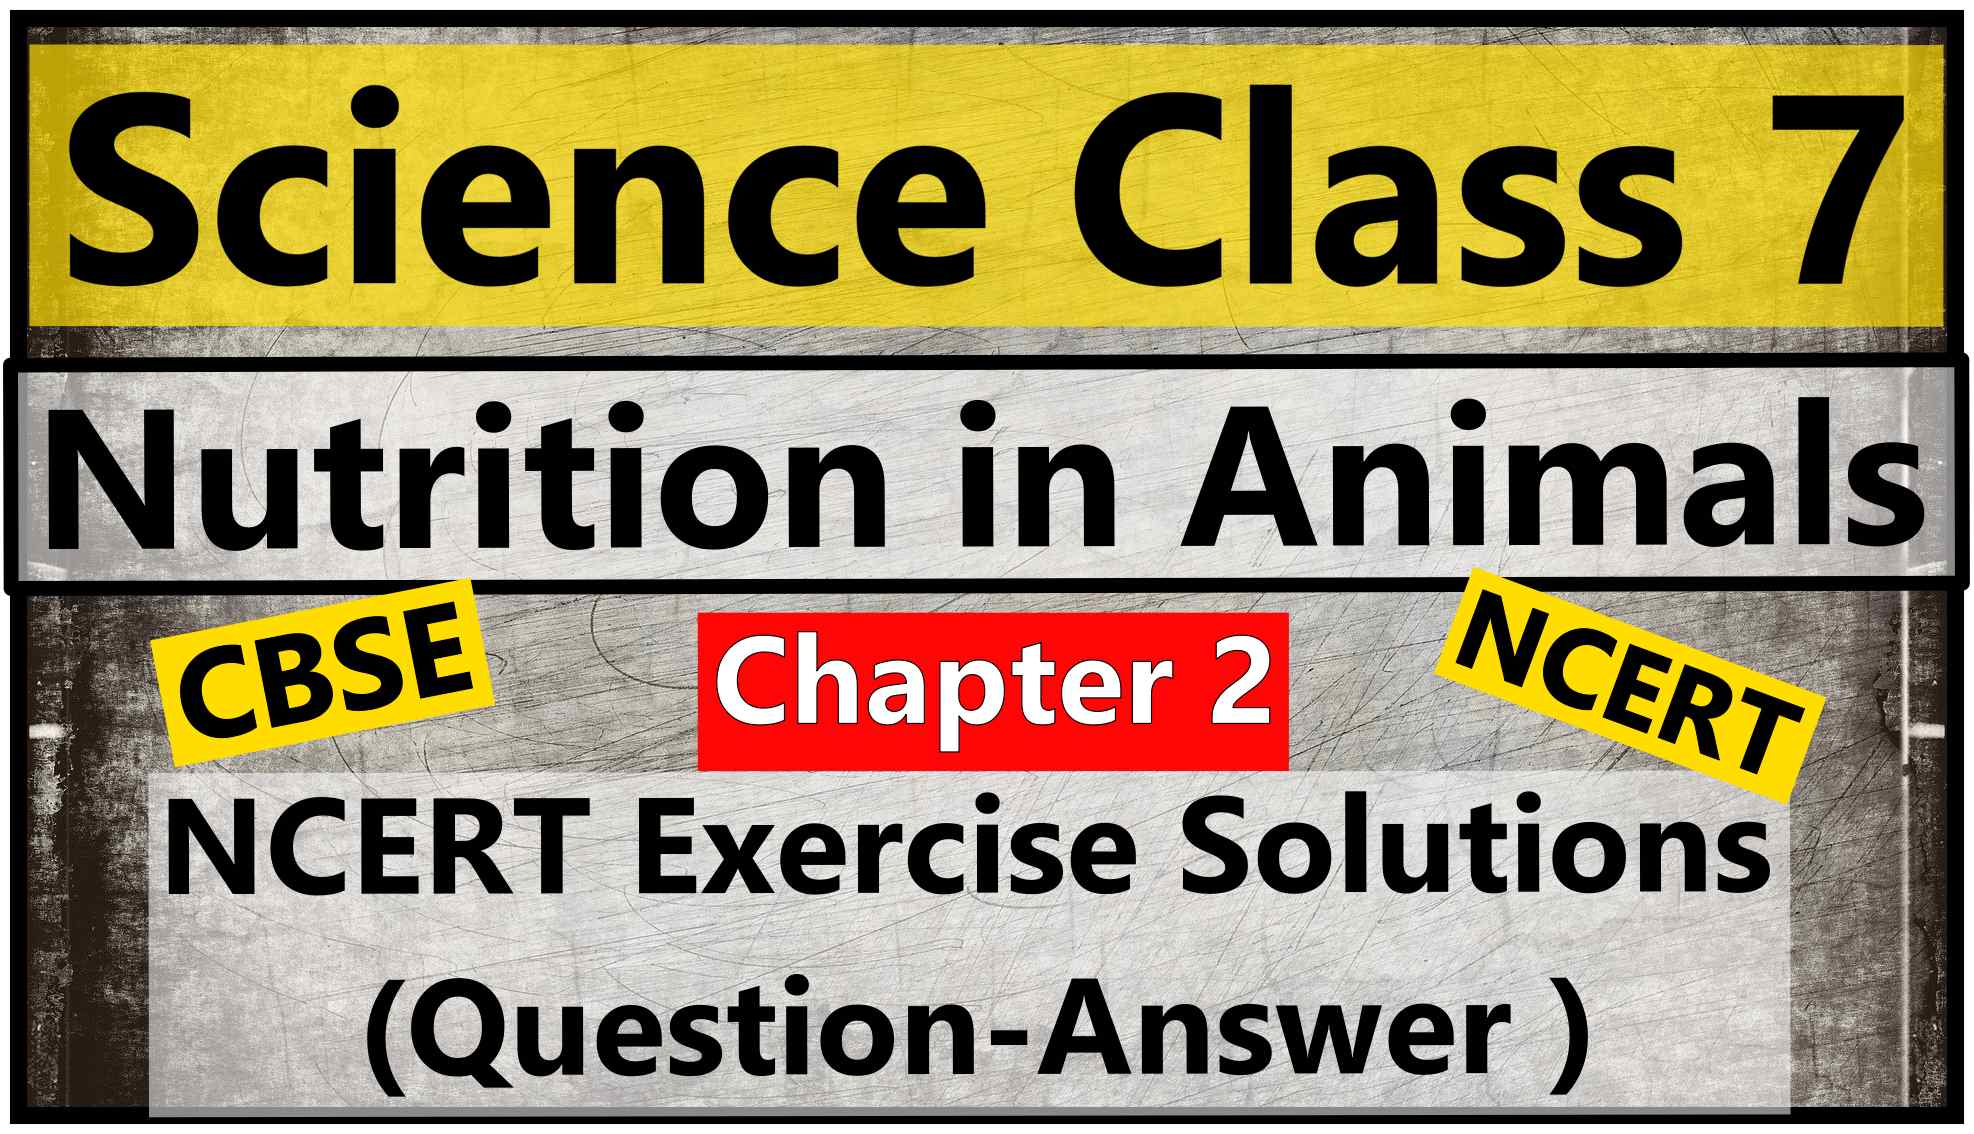 Science Class 7 Chapter 2 Nutrition in Animals- NCERT Exercise Solution